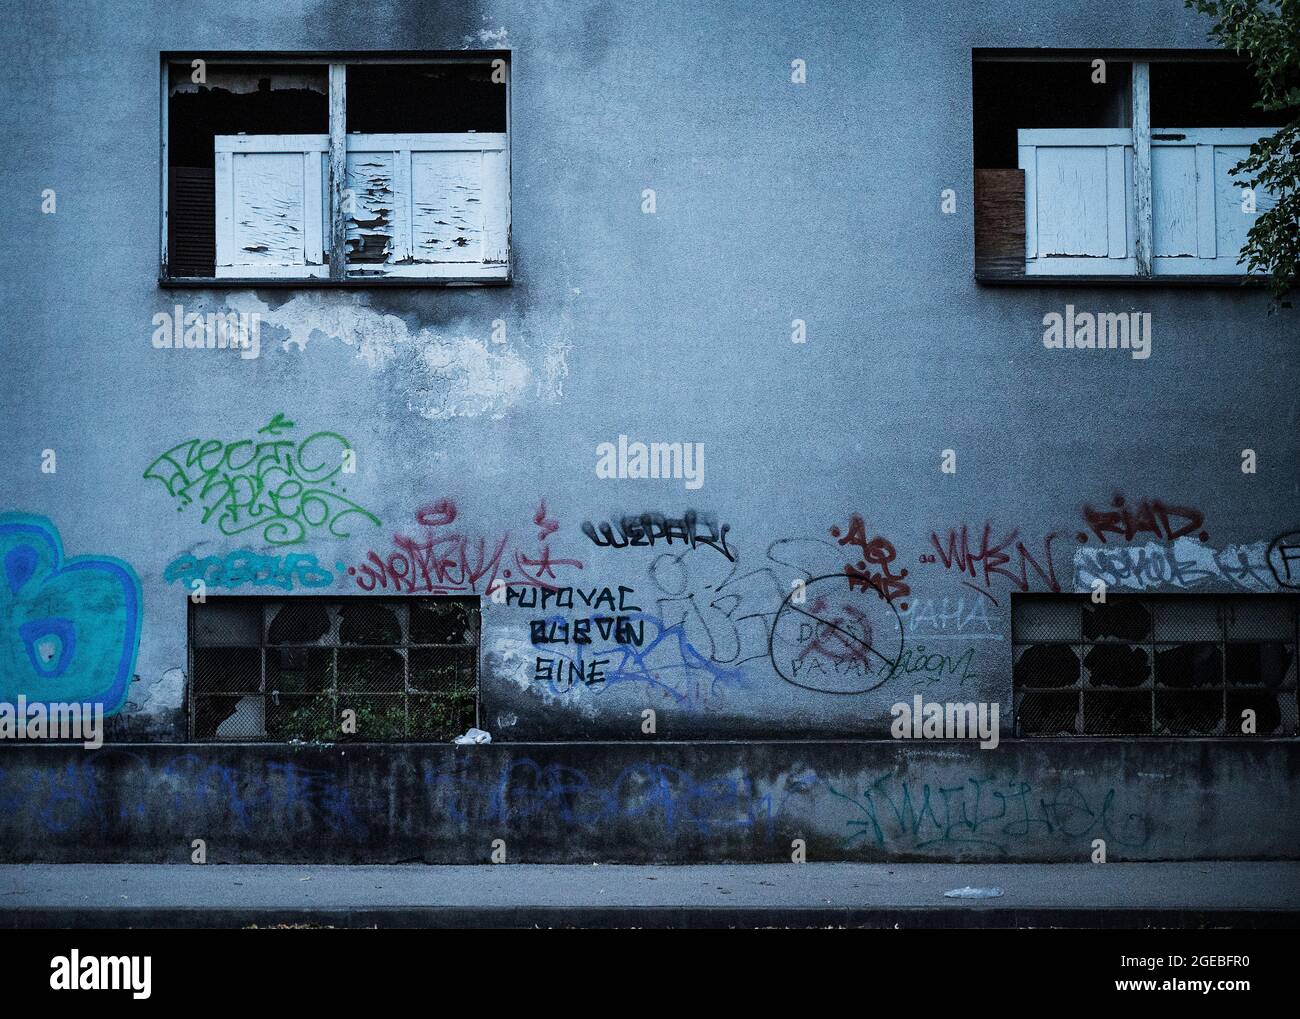 Graffiti on a building with many smashed windows in Zagreb, Croatia Stock Photo